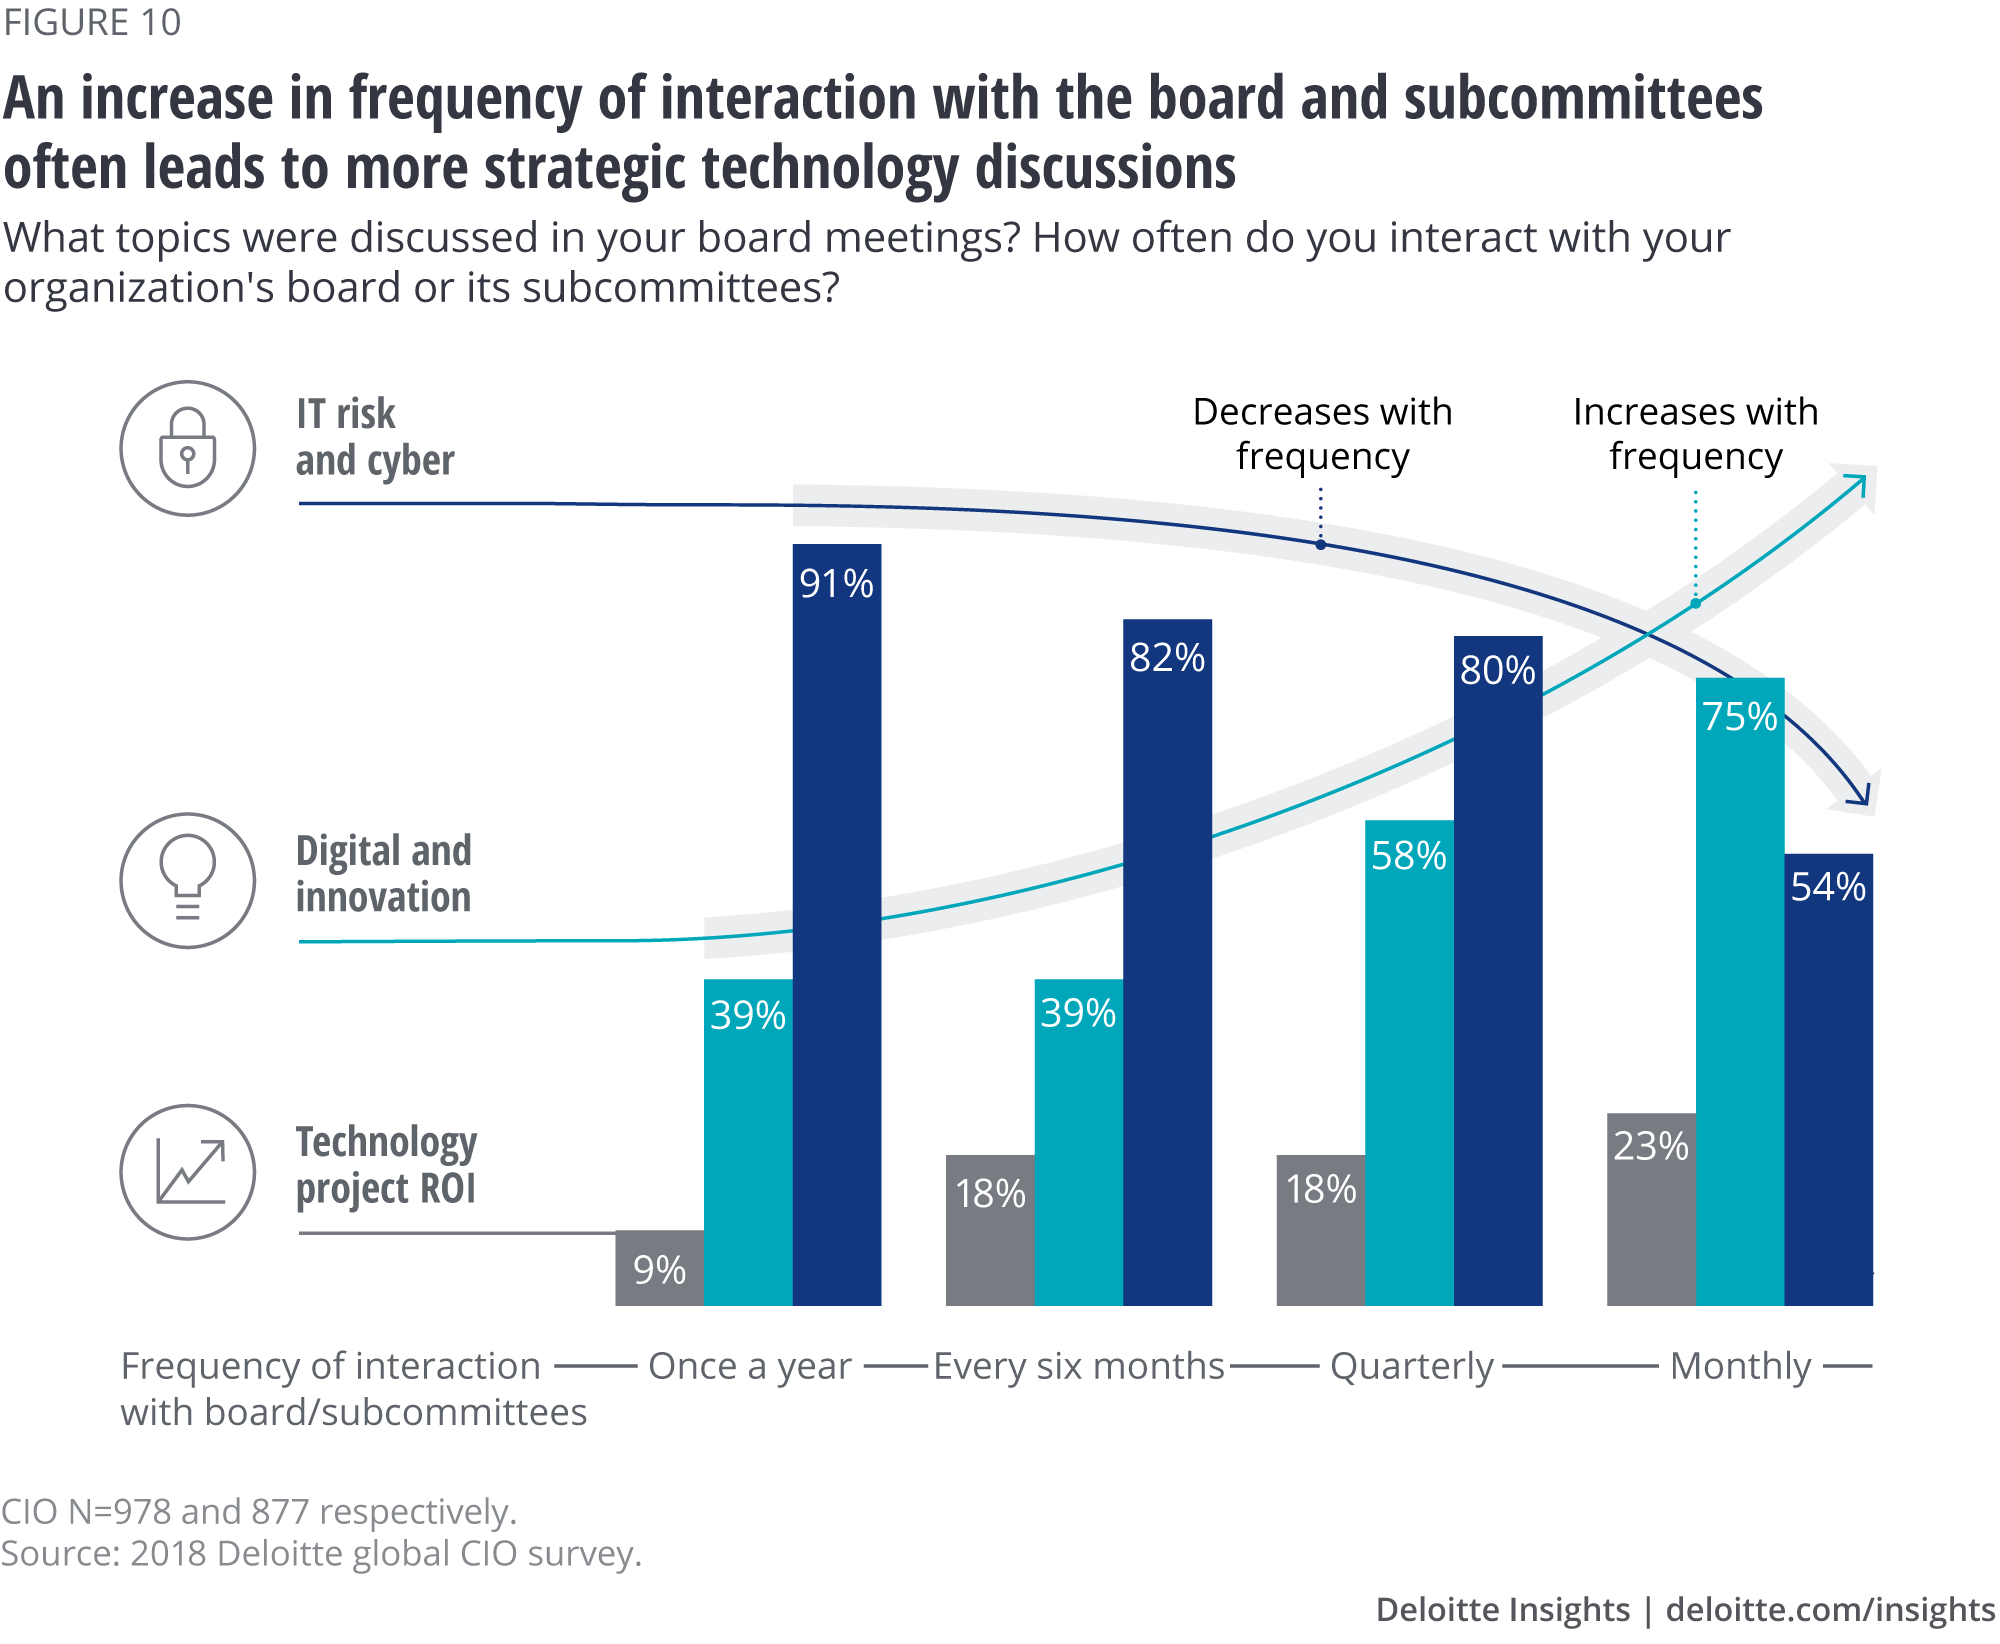 An increase in frequency of interaction with the board and subcommittees often leads to more strategic technology discussions